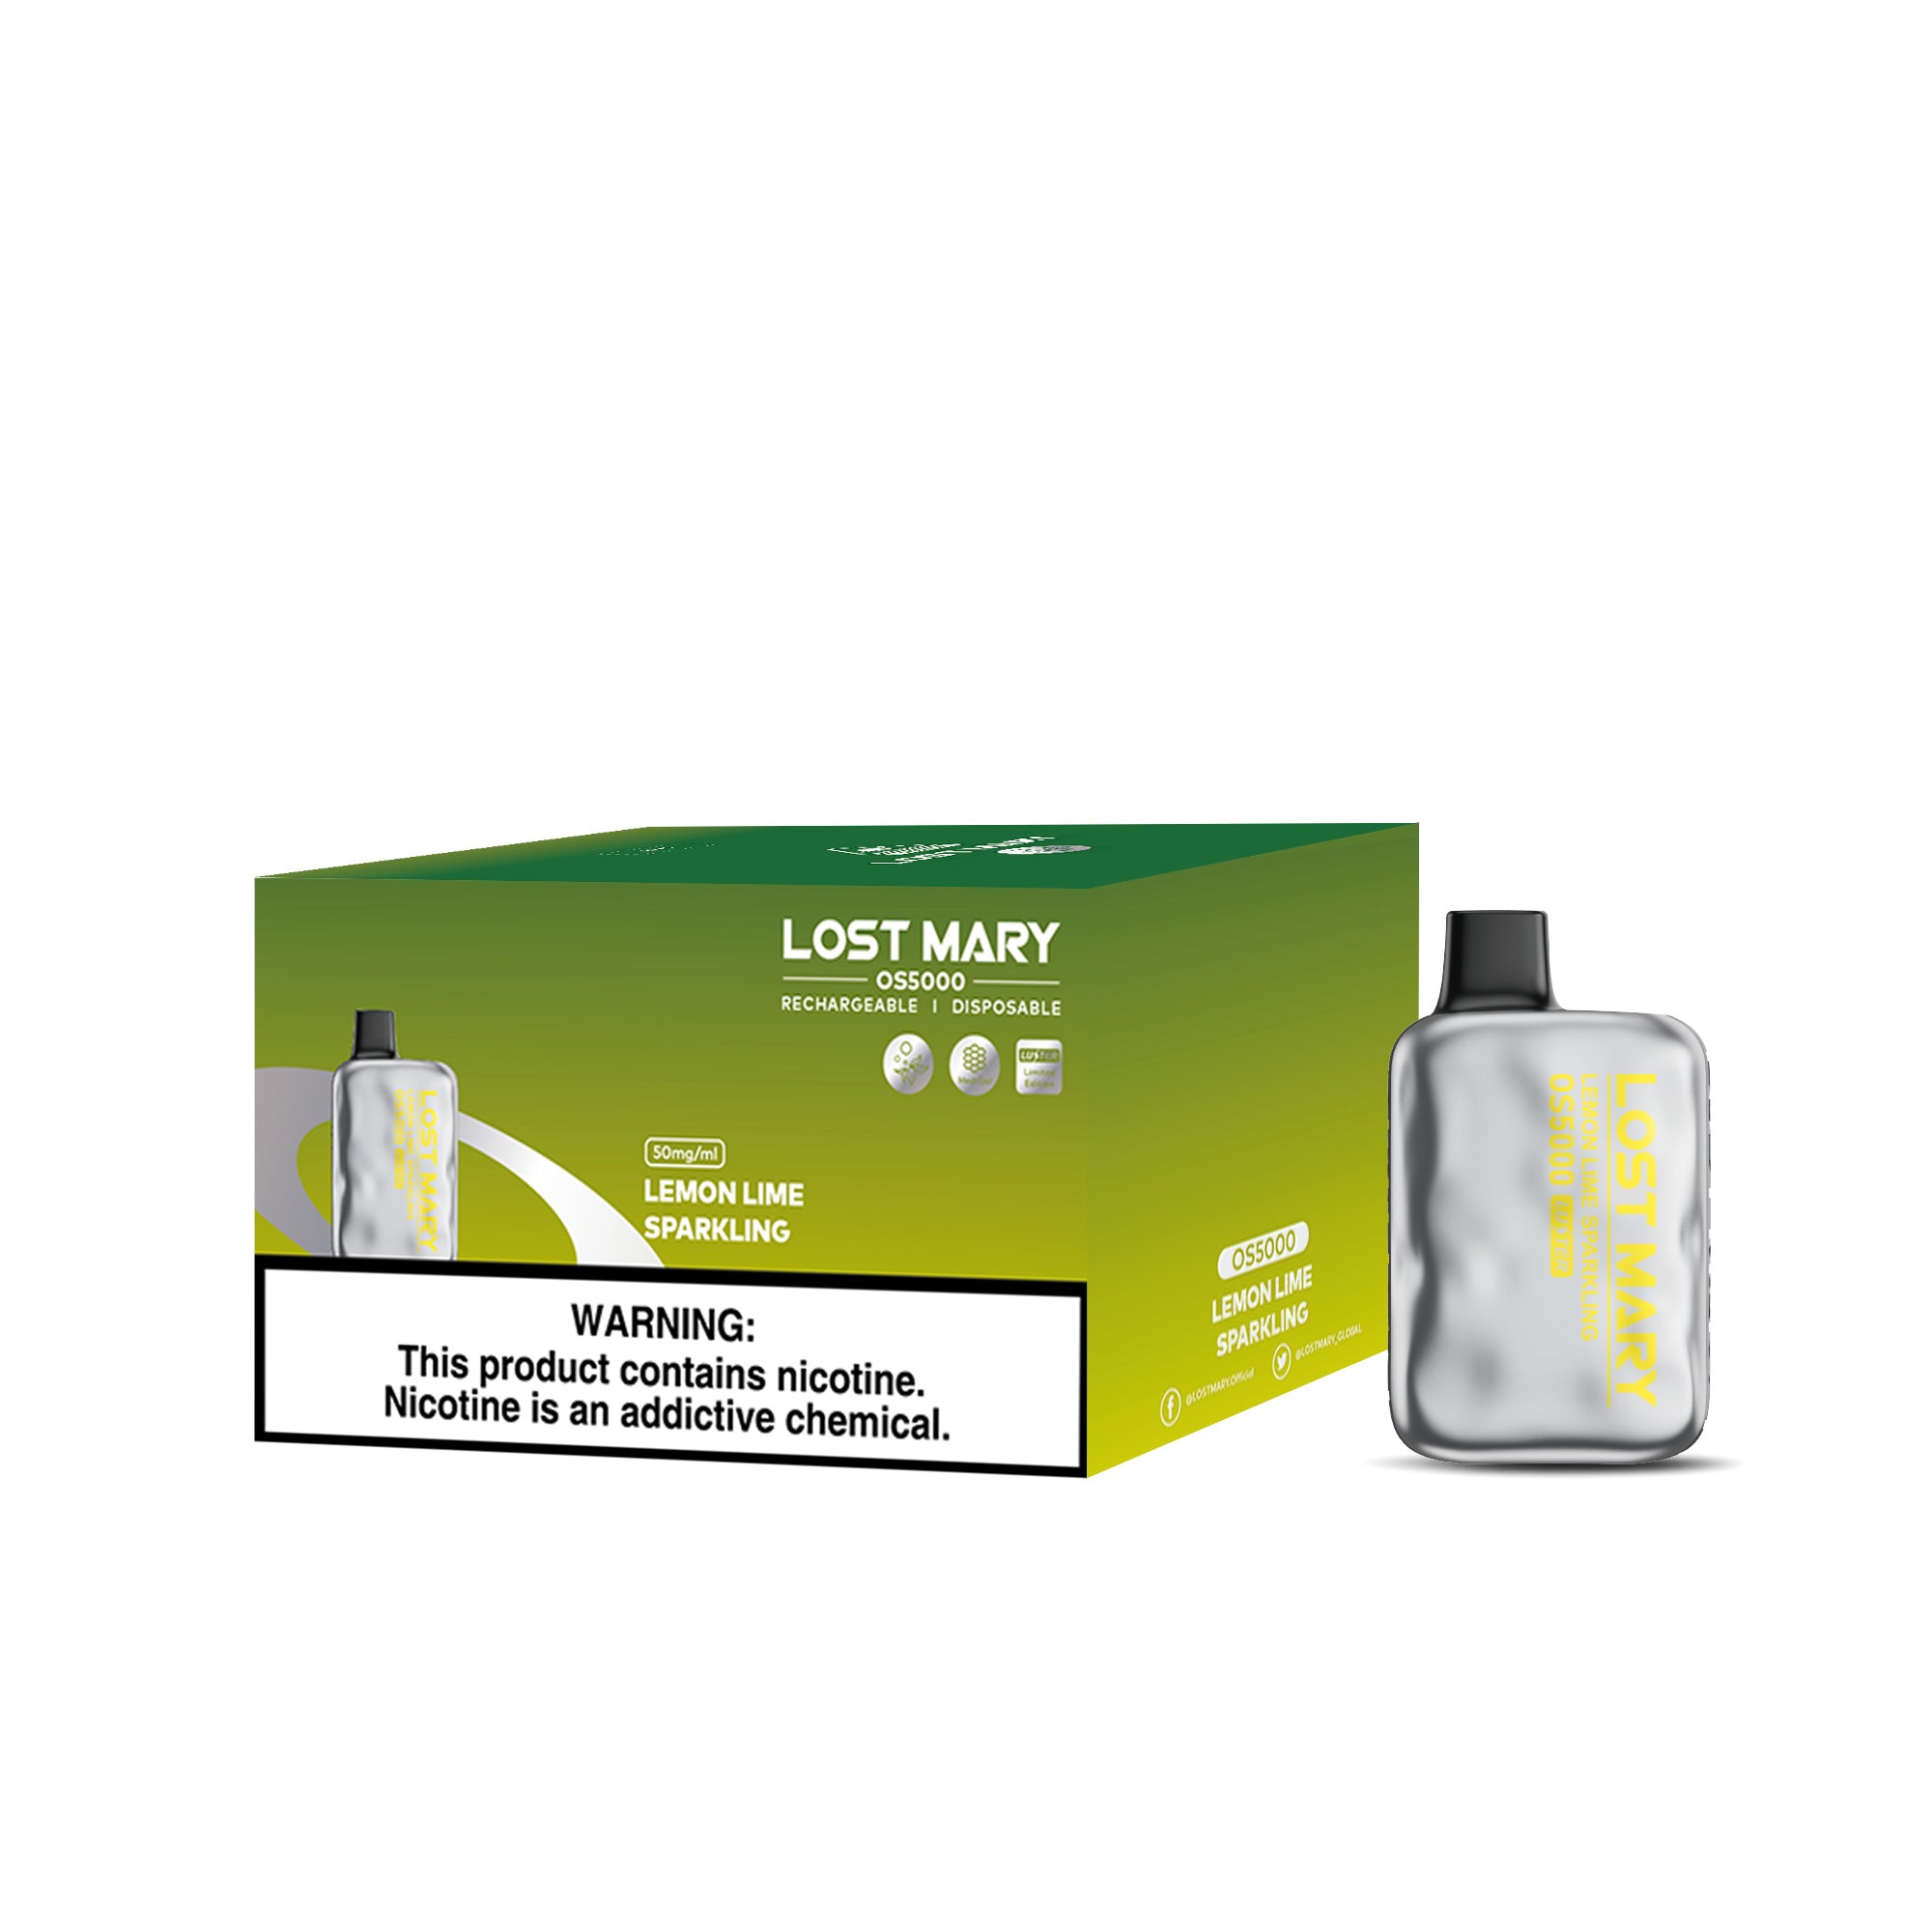 EB Lost Mary Luster OS5000 Puffs Rechargeable Disposable Vape Kit Wholesale - 1 Box / 10pcs